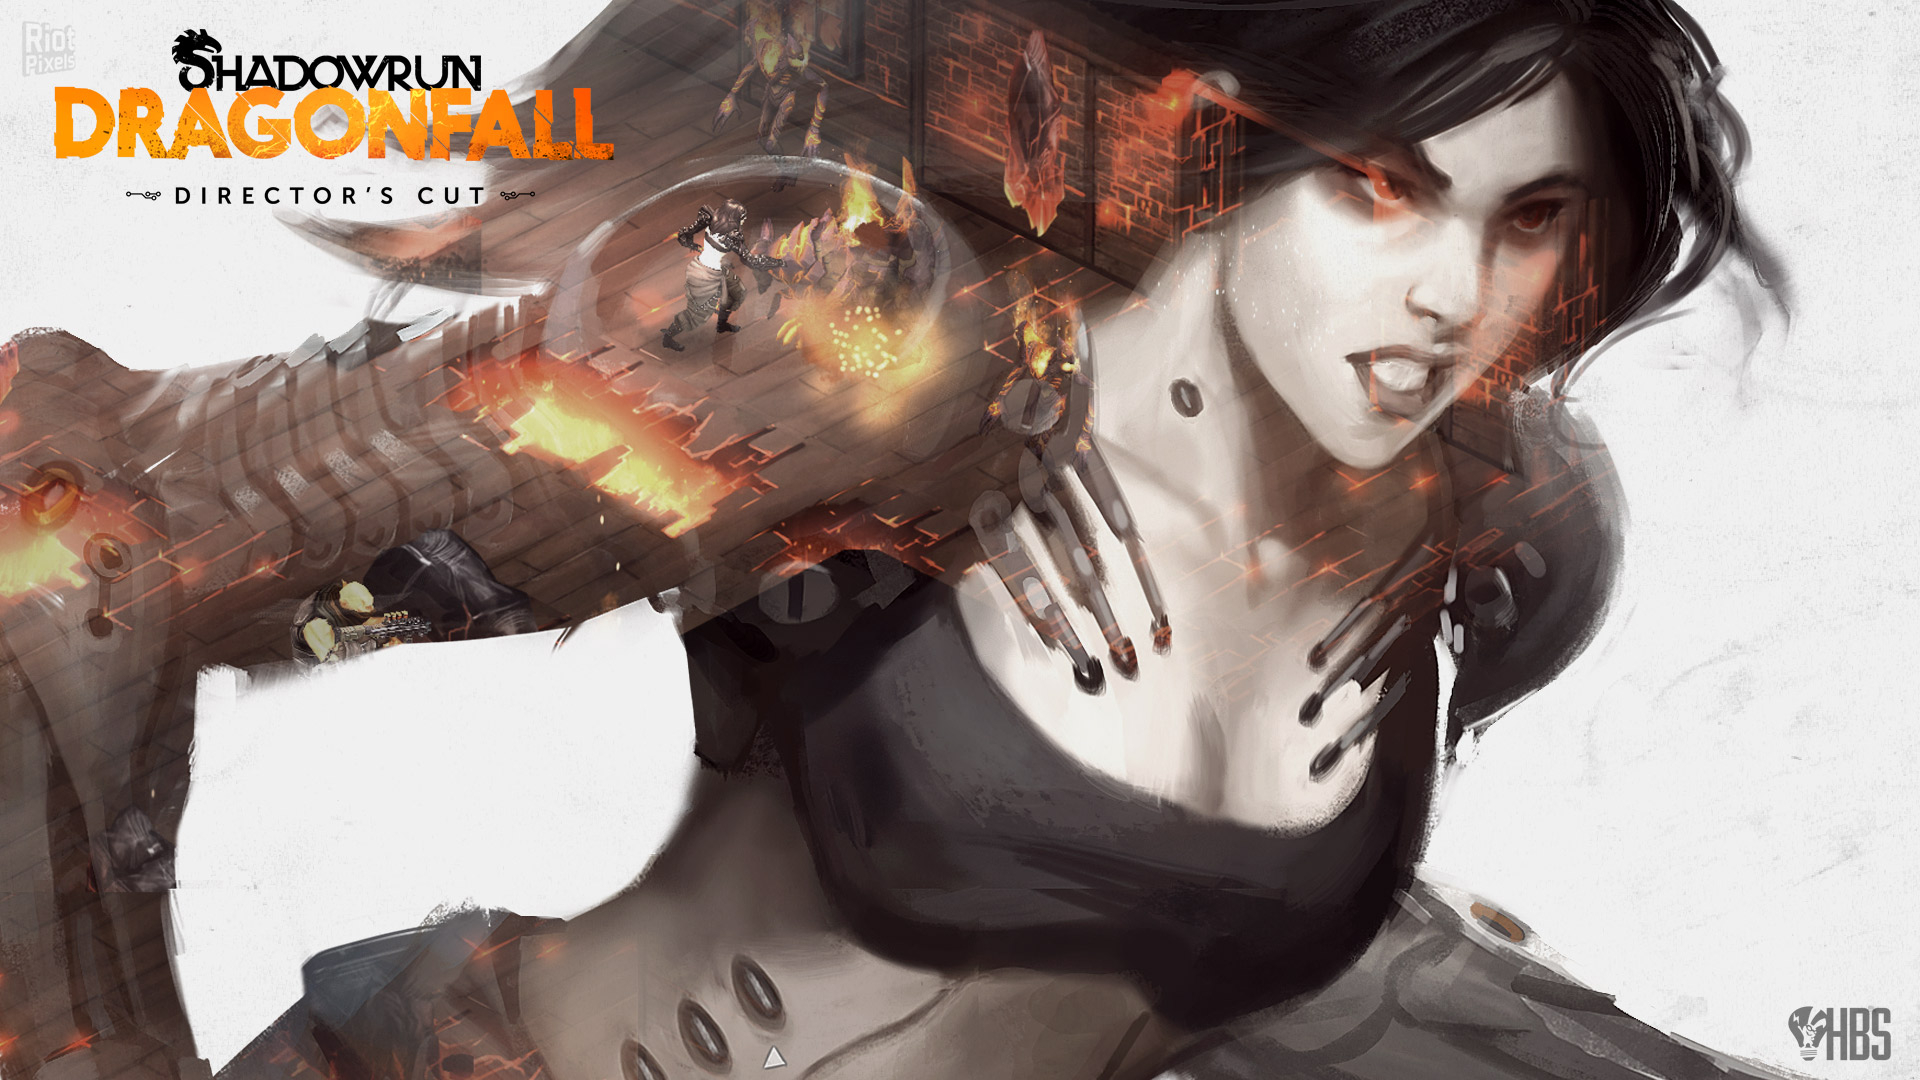 1920x1080 Shadowrun: Dragonfall Director's Cut game wallpapers at Riot Pixels, images